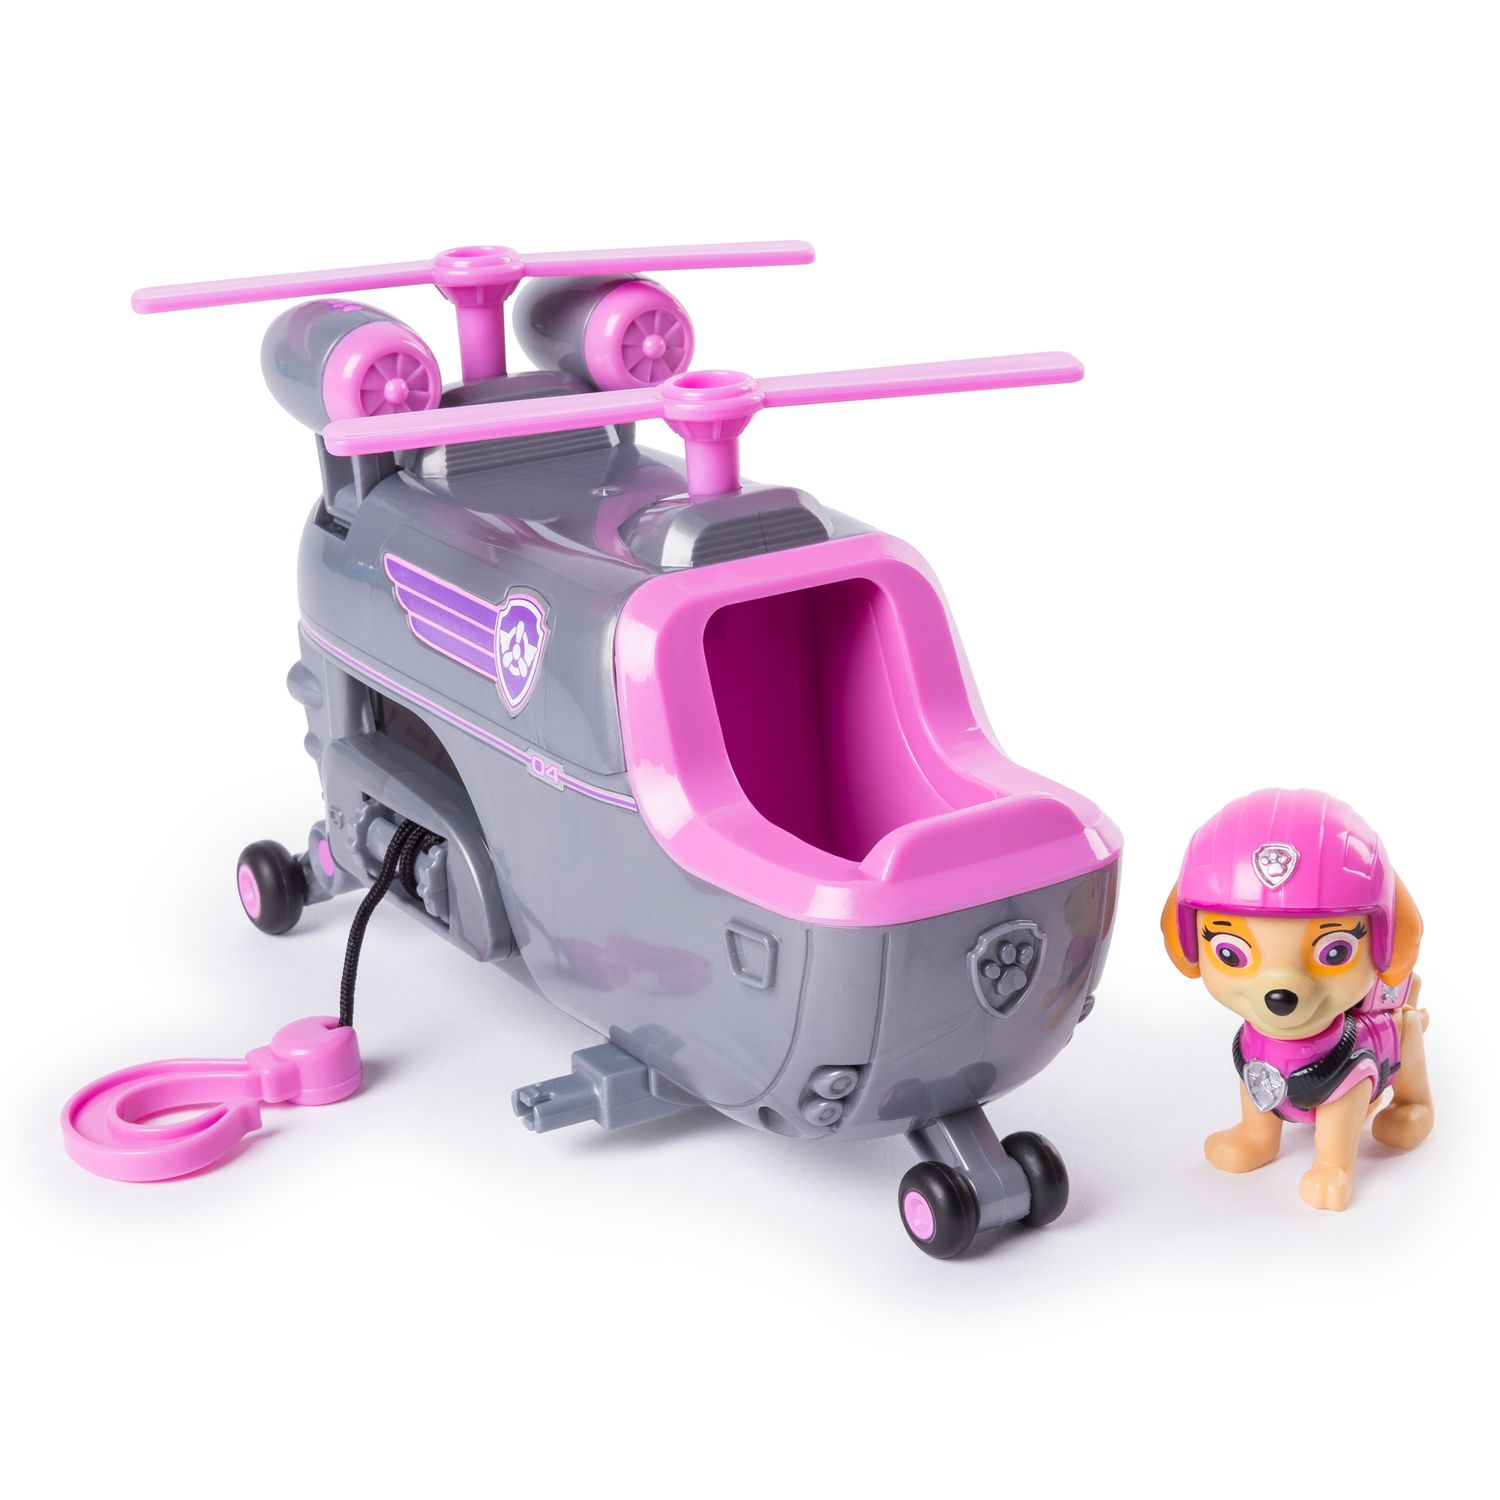 paw patrol police helicopter